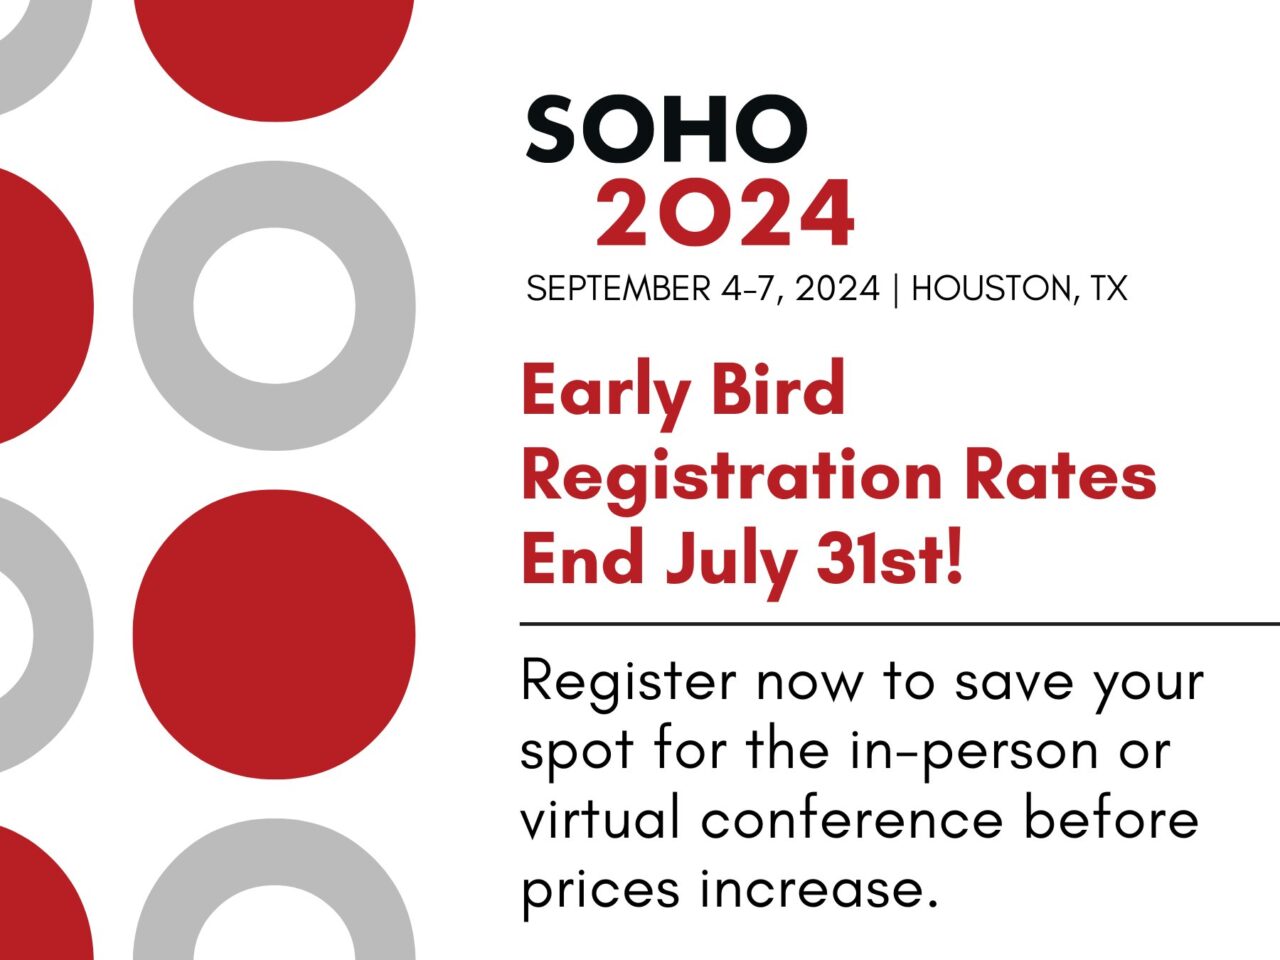 Early Bird registration rates for SOHO 2024 are ending July 31st